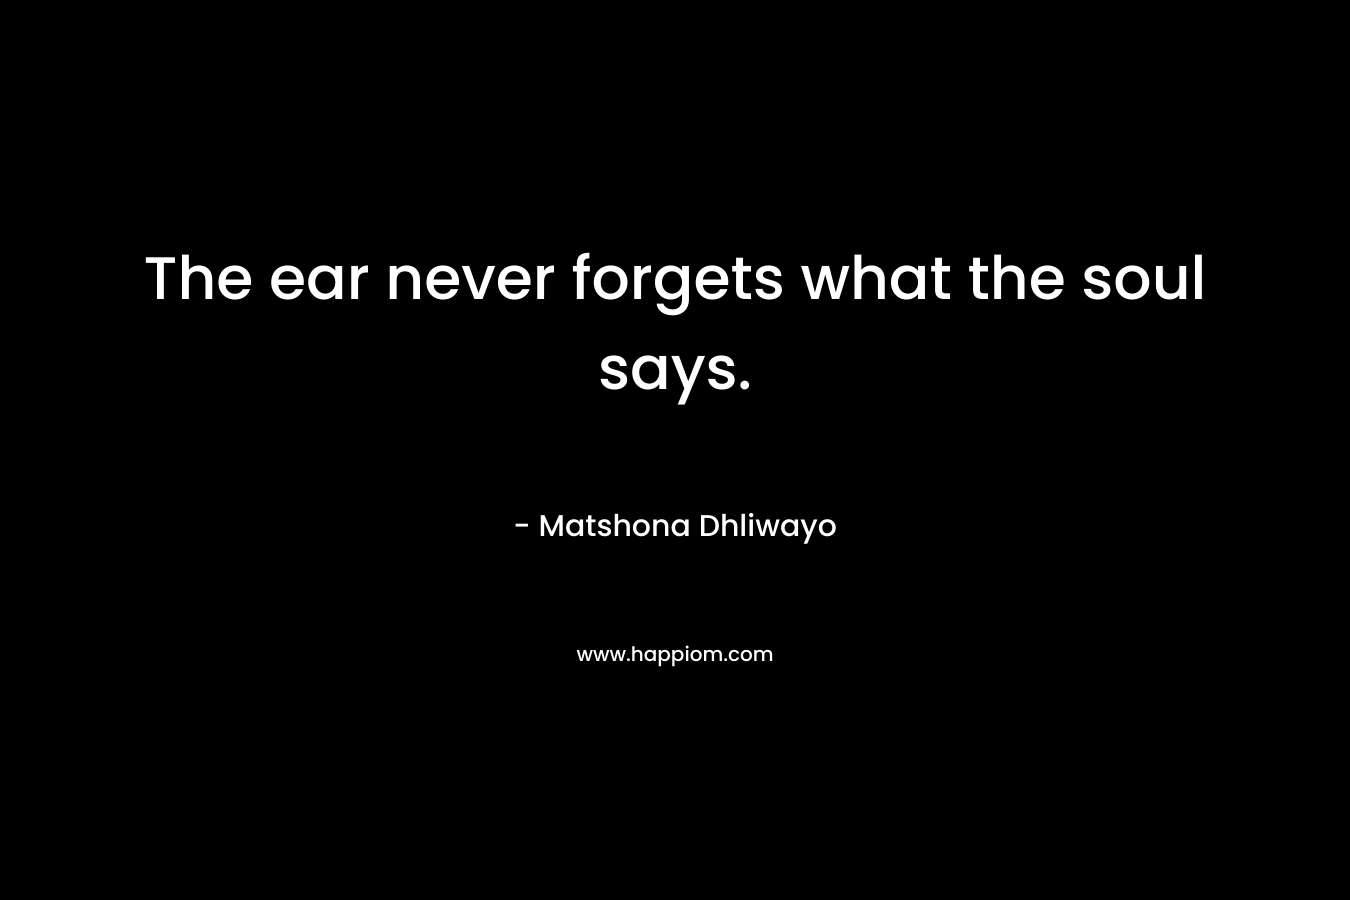 The ear never forgets what the soul says.